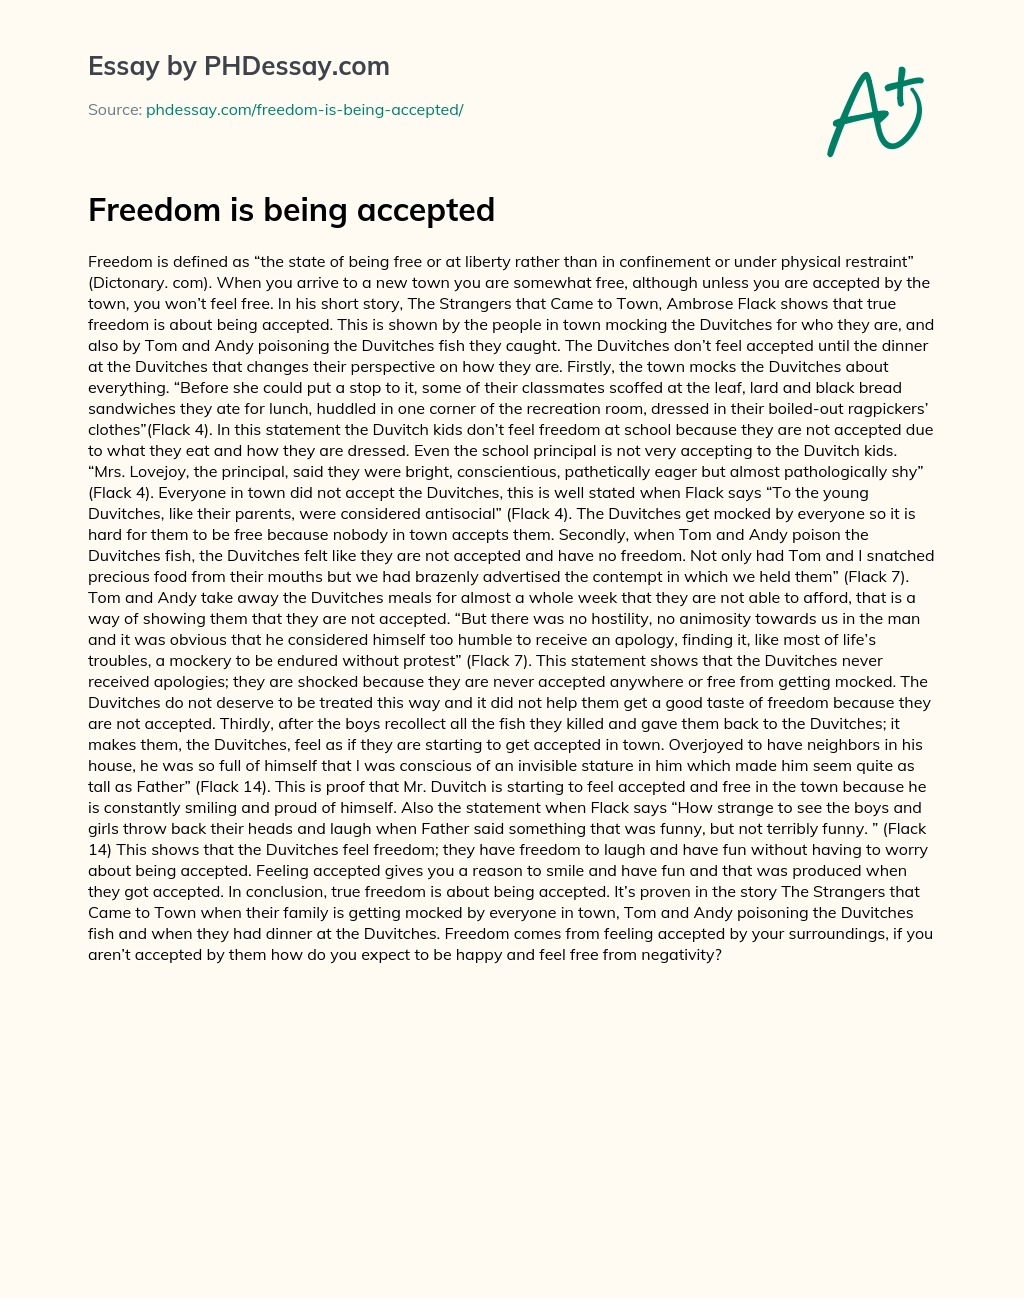 Freedom is being accepted essay